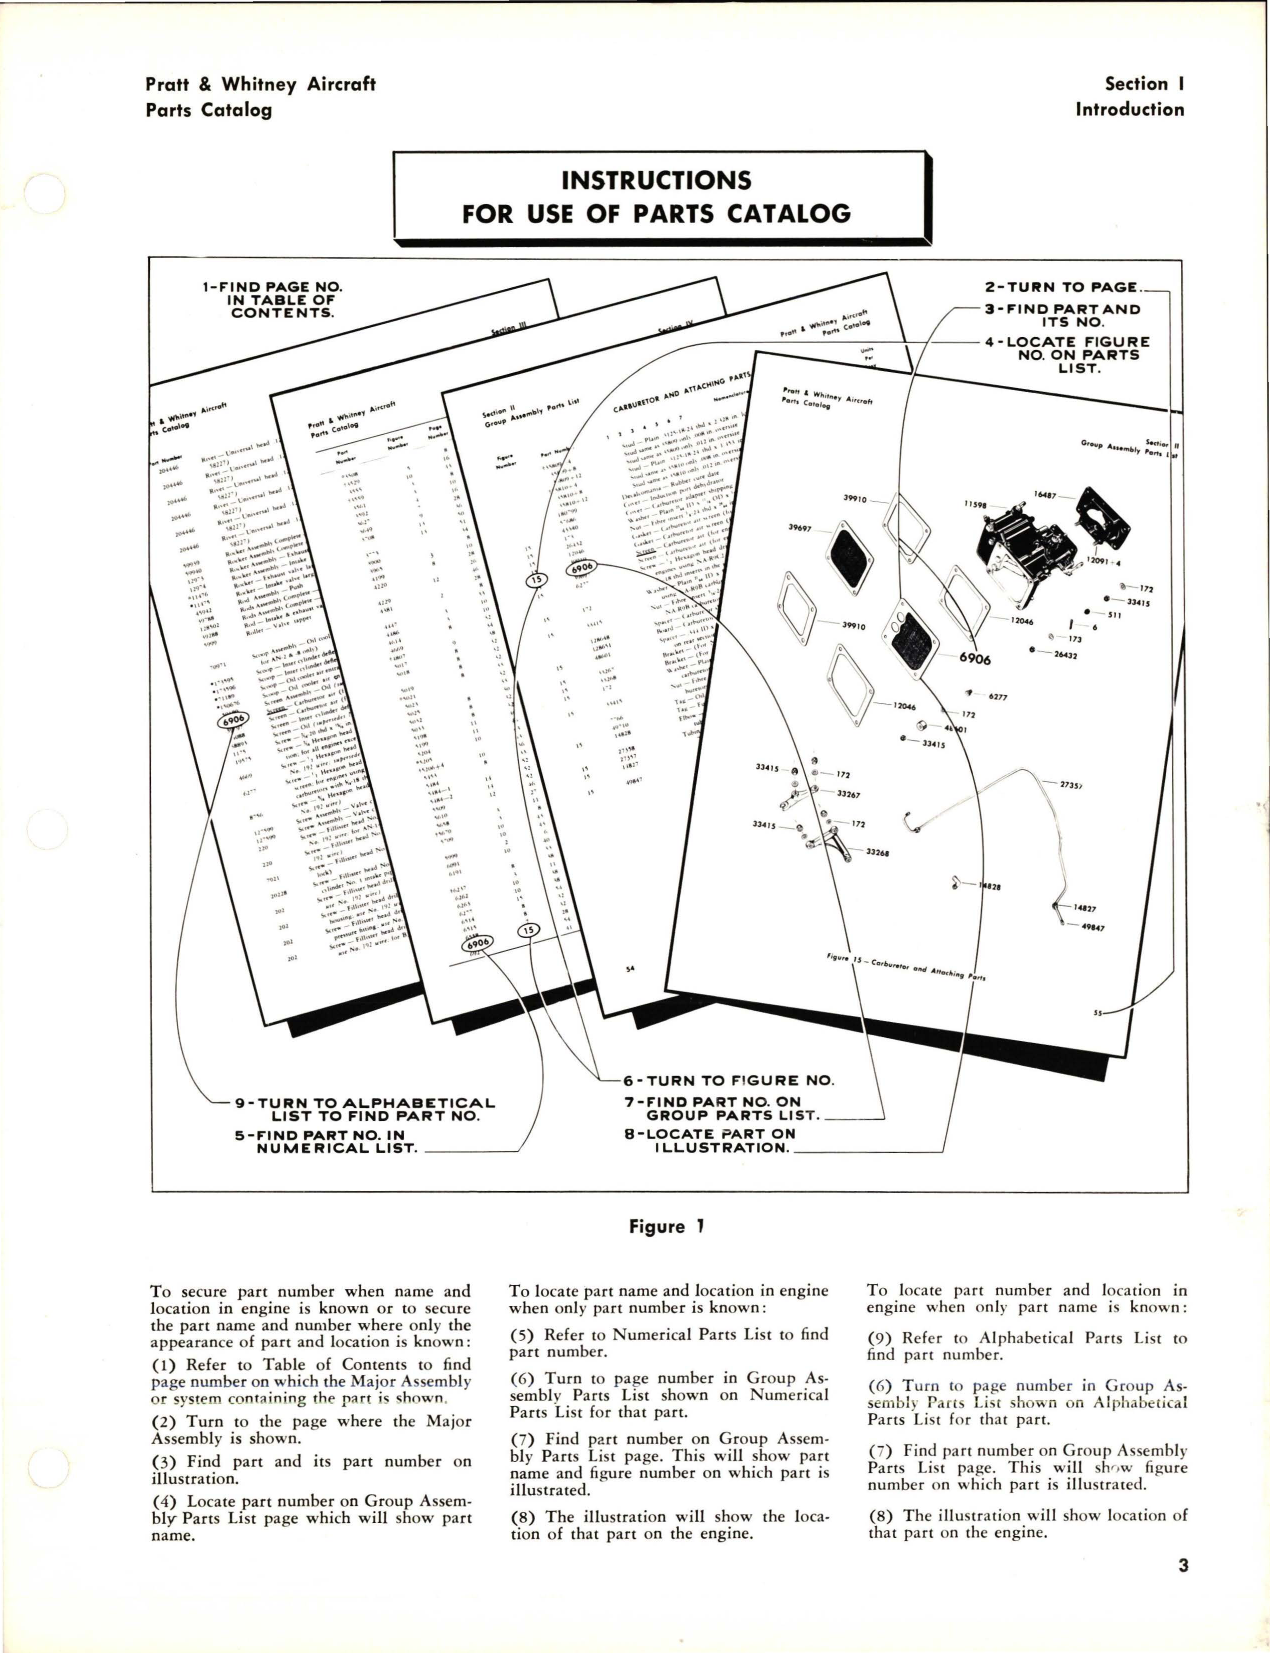 Sample page 9 from AirCorps Library document: Parts Catalog for Wasp Junior - AN-1, AN-2, AN-3, AN-4, AN-6, AN-6B, AN-8, AN-10, AN-12, AN-12B, AN-14B, B3, B4, B5